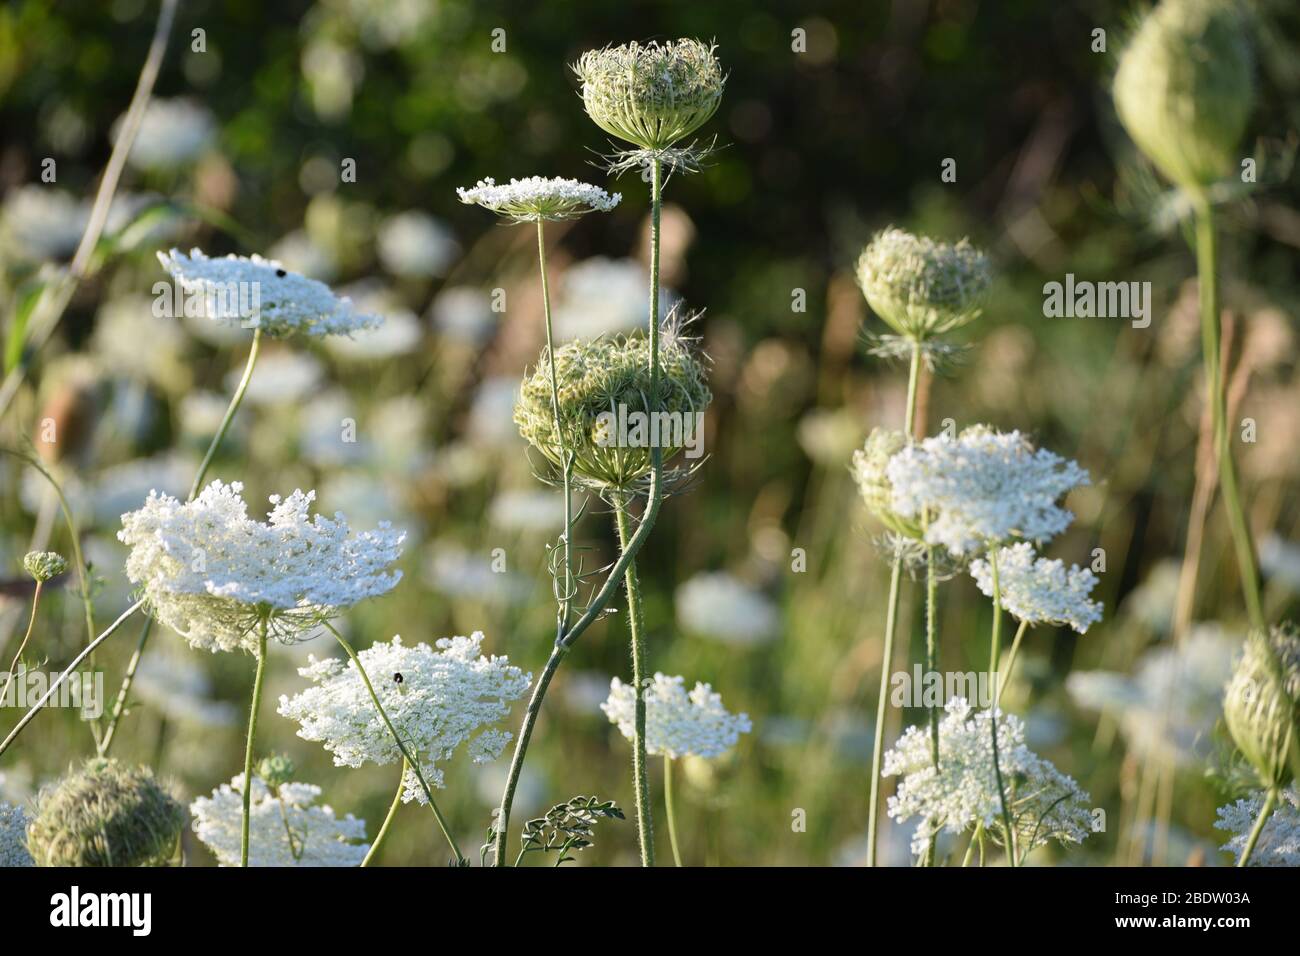 White carrot weeds in a field. Wild summer flowers surrounded by grass. Stock Photo